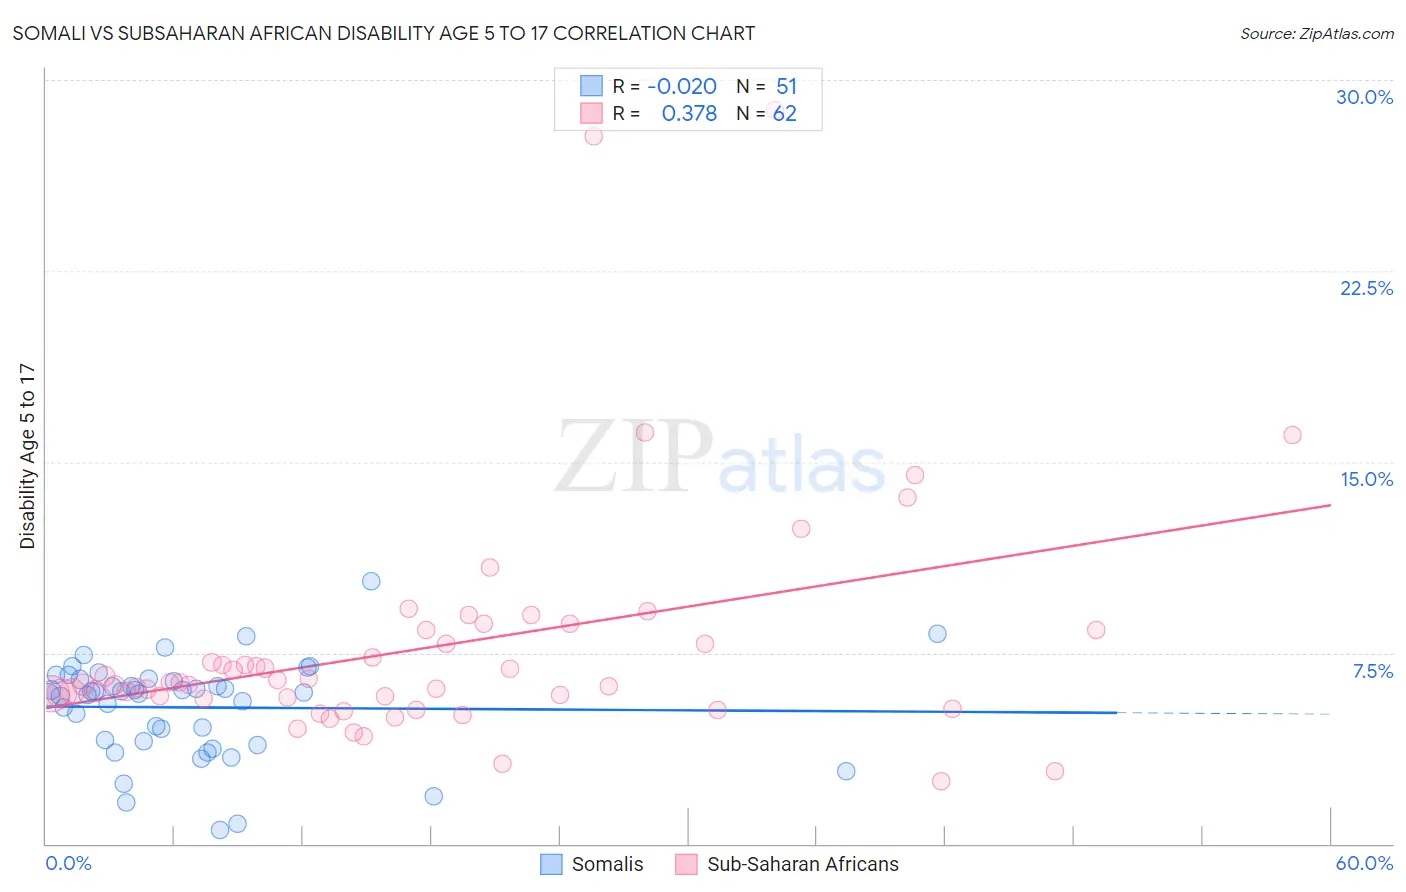 Somali vs Subsaharan African Disability Age 5 to 17